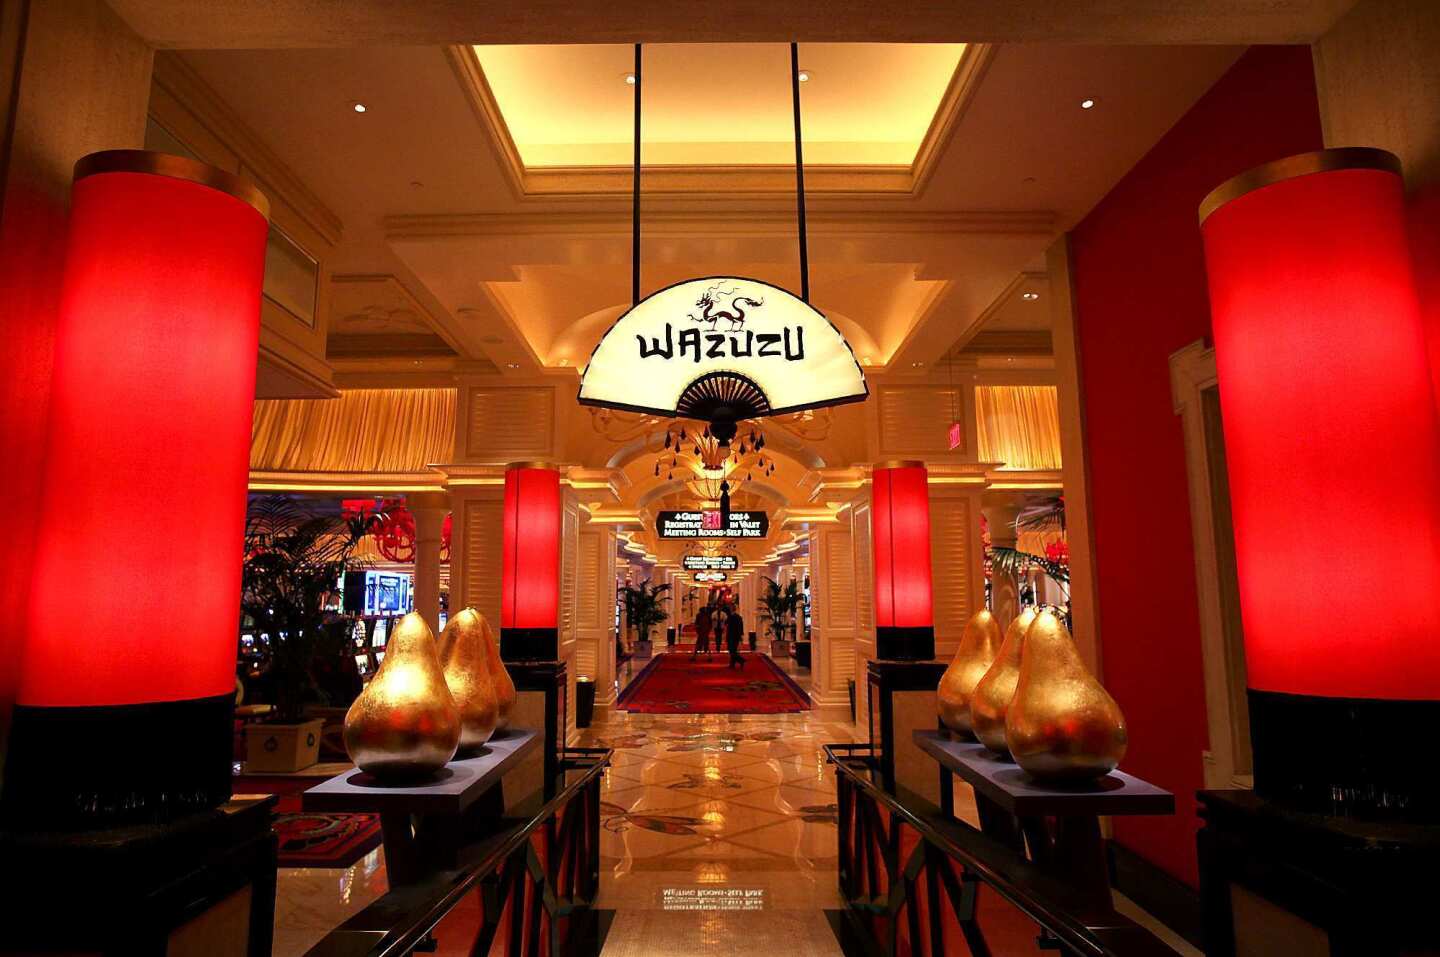 Golden-colored pears adorn the casino entrance to Wazuzu, an Asian restaurant inside Las Vegas' Encore, that features vegan dishes on the menu. In fact, vegans visiting Las Vegas now have some tasty dining options at the Encore and Wynn resorts.